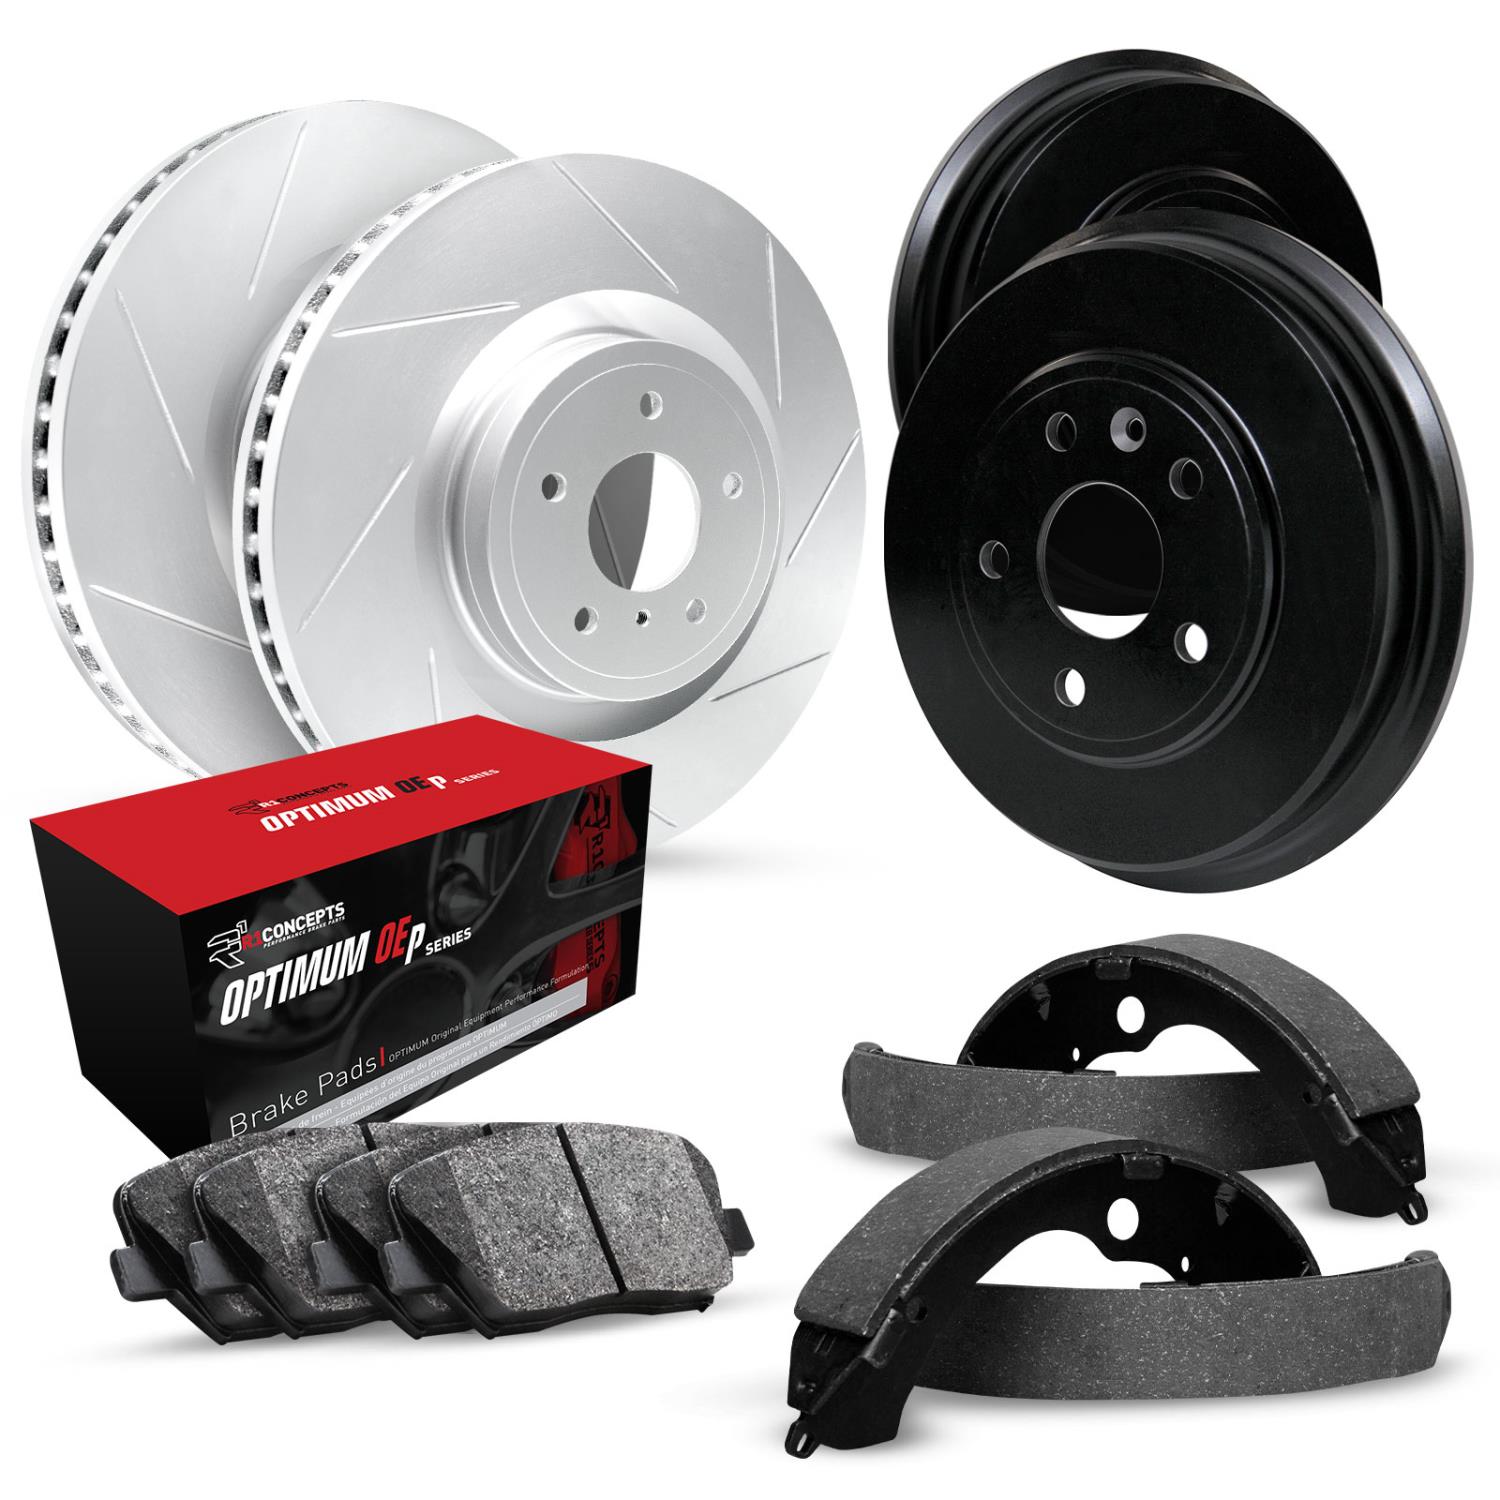 GEO-Carbon Slotted Brake Rotor & Drum Set w/Optimum OE Pads & Shoes, 2001-2002 Ford/Lincoln/Mercury/Mazda